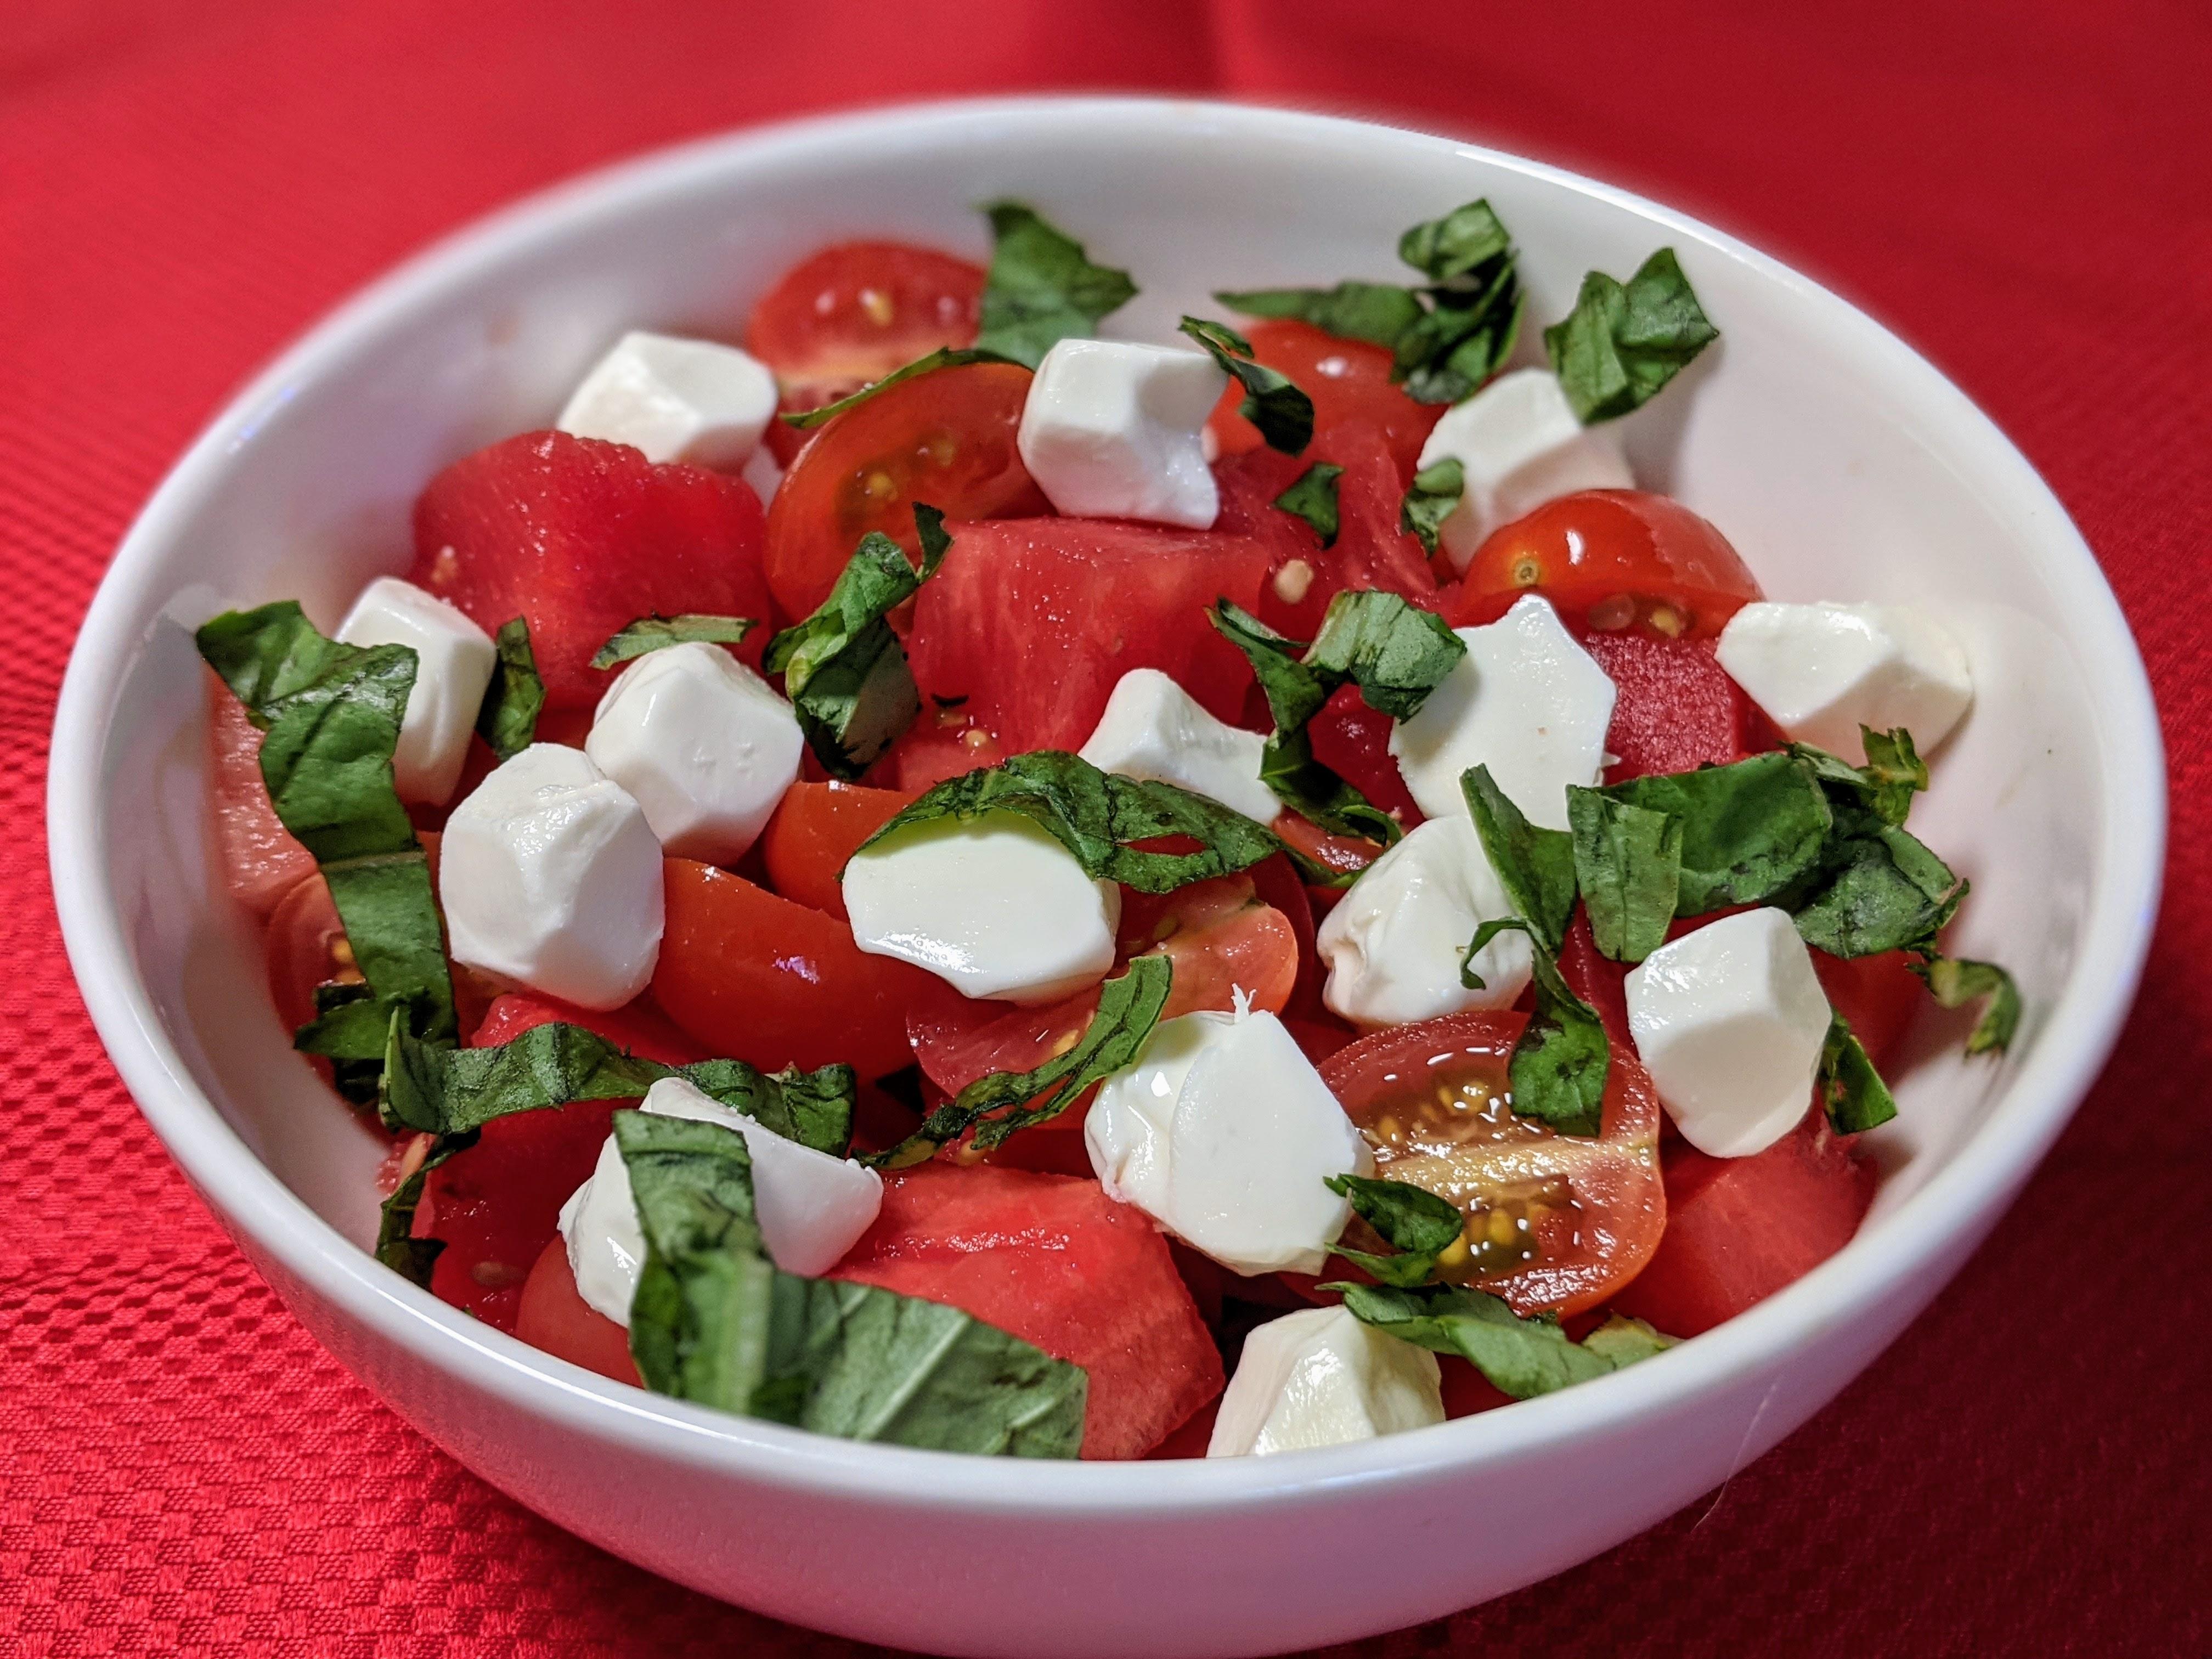 Watermelon, tomato and mozzarella cheese in a white round bowl with a red background.